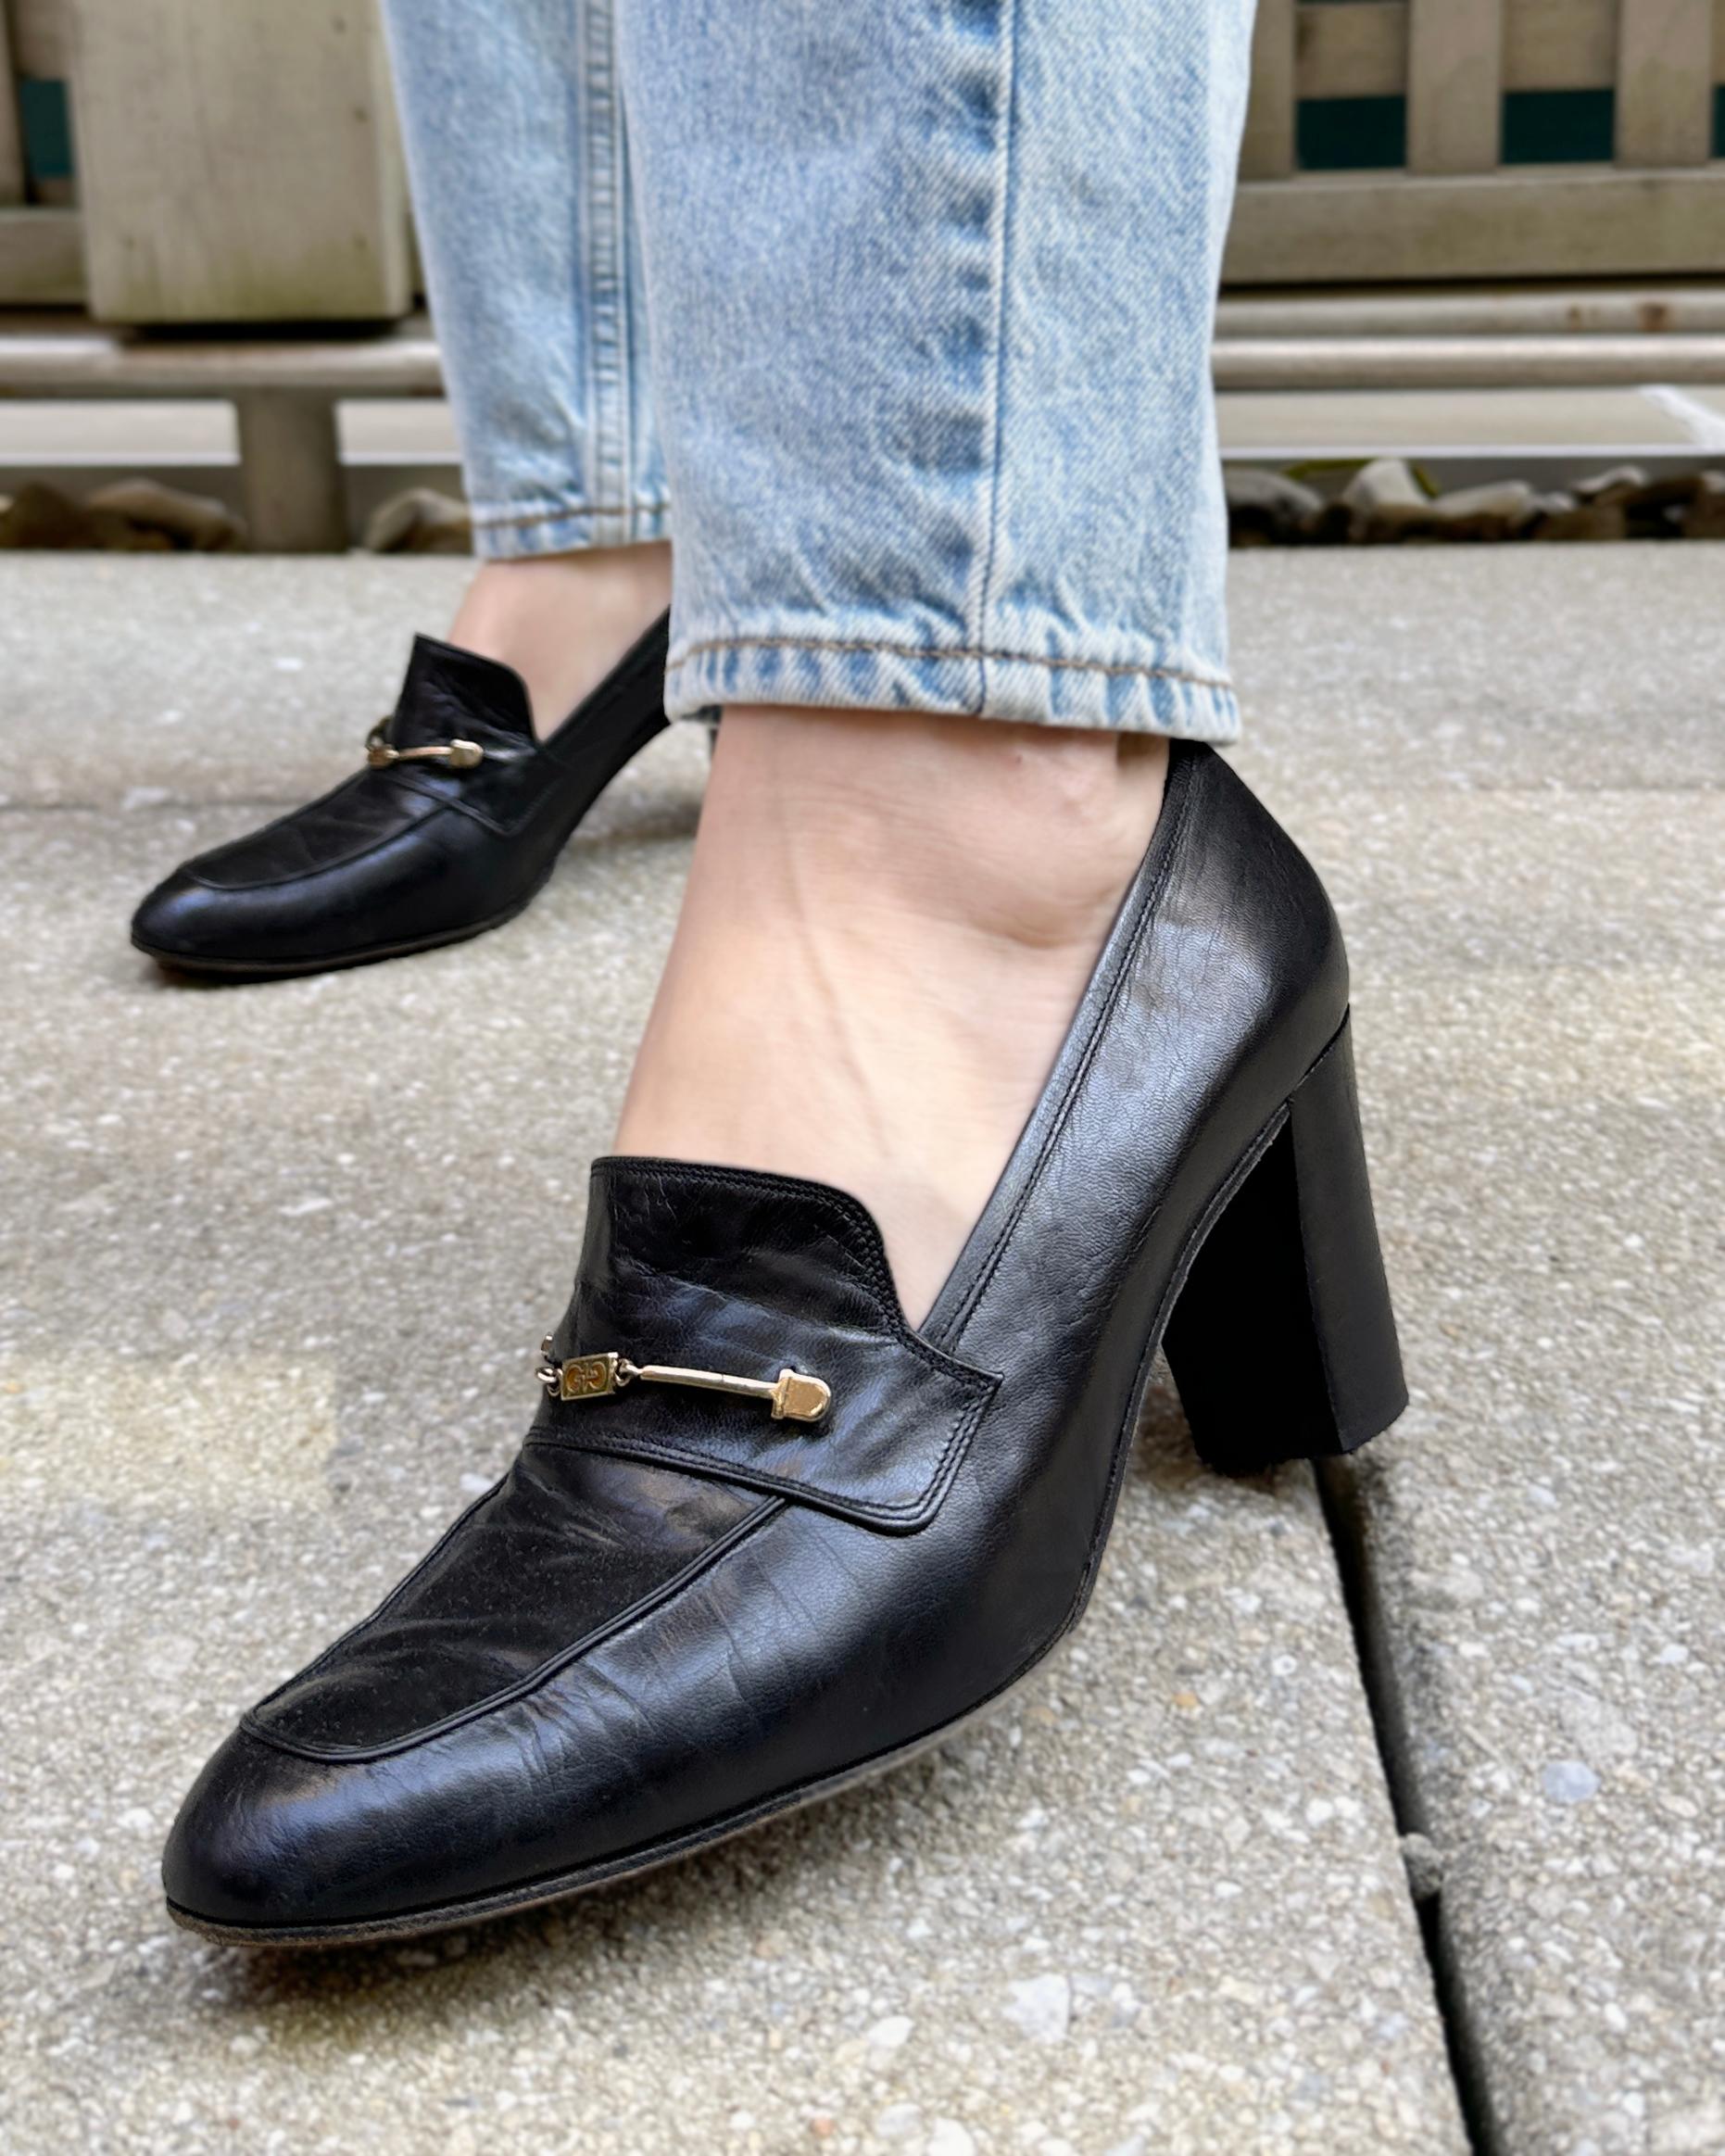 VINTAGE 1970s GUCCI HEELED LOAFERS 1